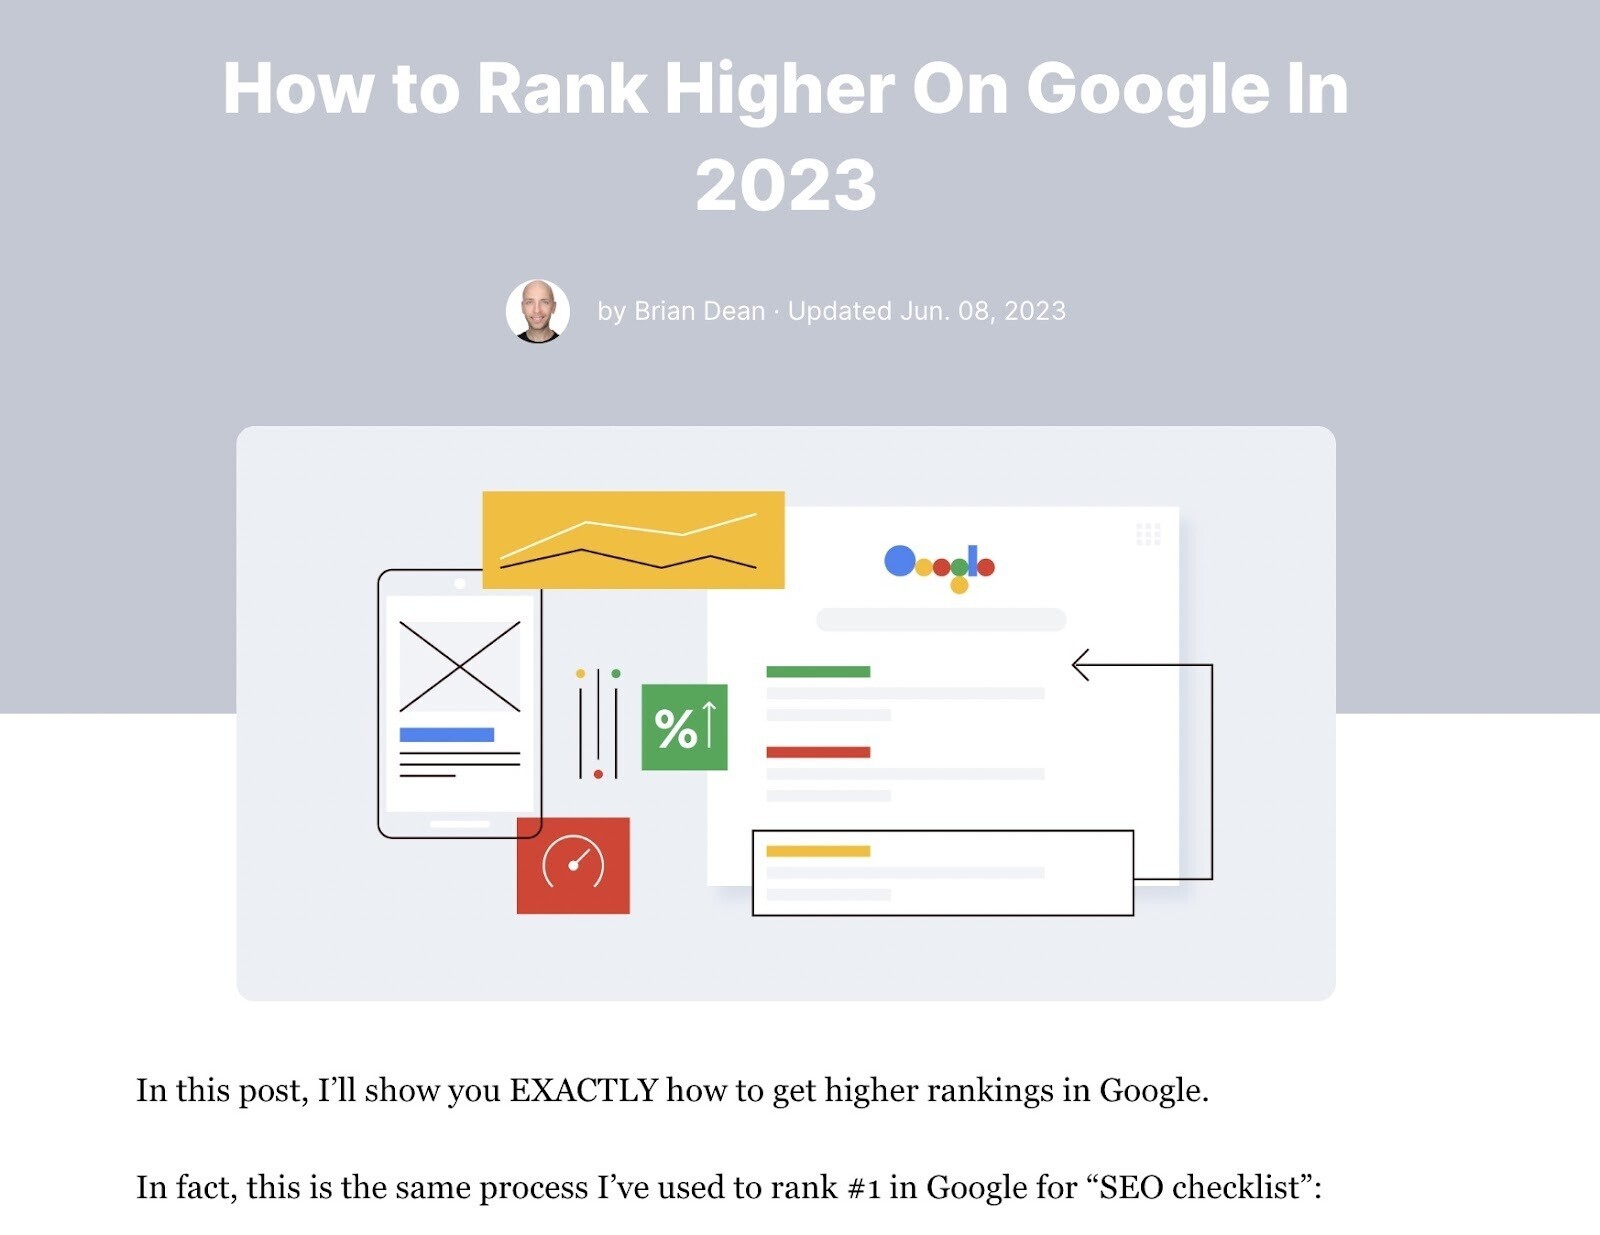 Backlinko blog on "How to Rank Higher on Google in 2023" by Brian Dean